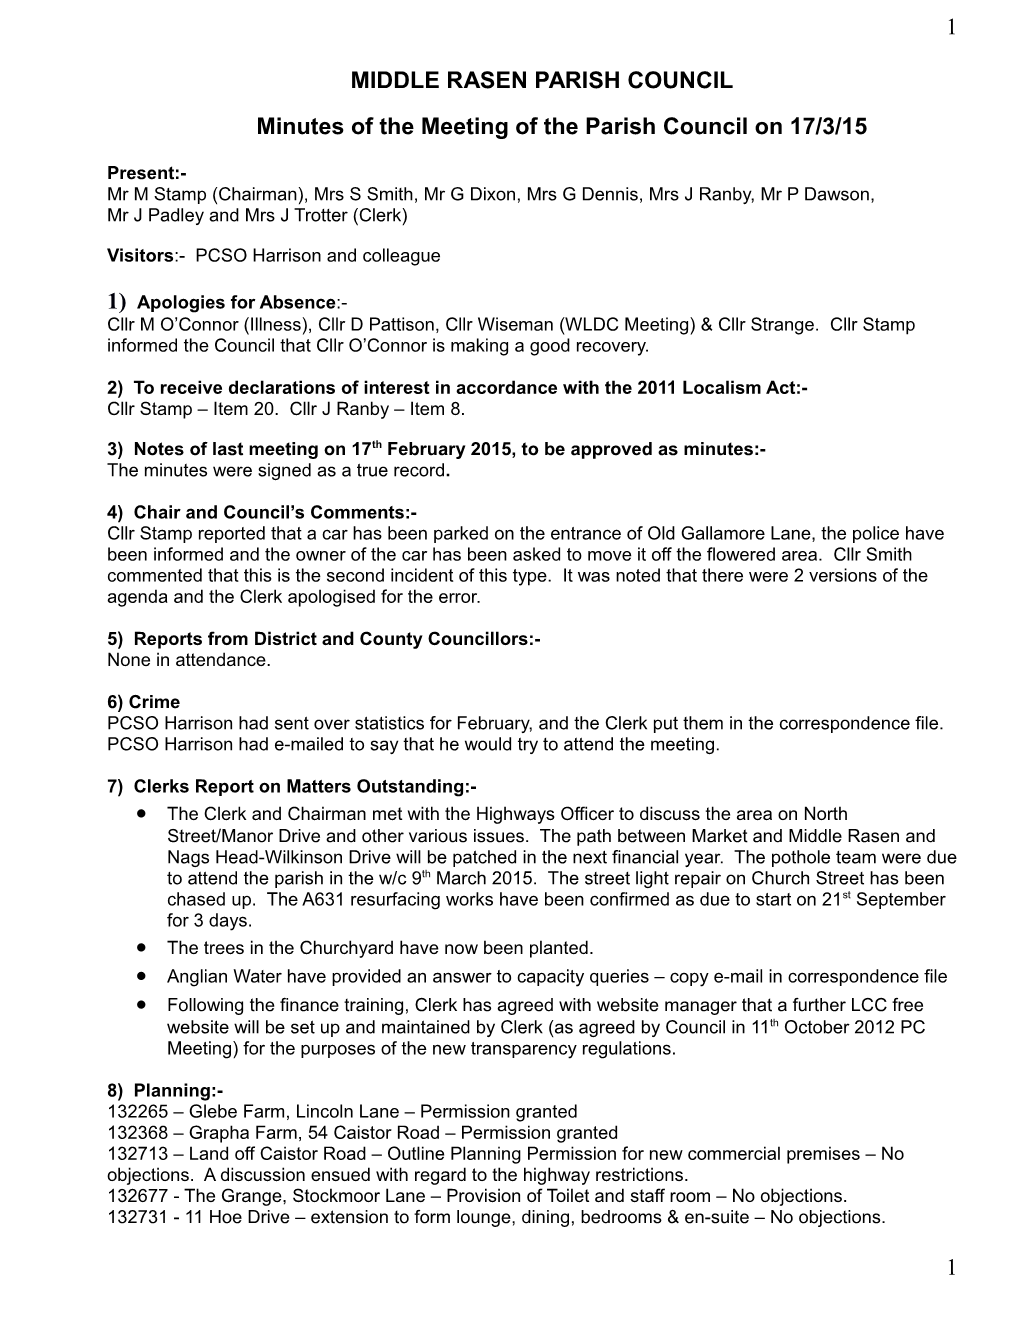 Minutes of Themeeting of the Parish Council On17/3/15